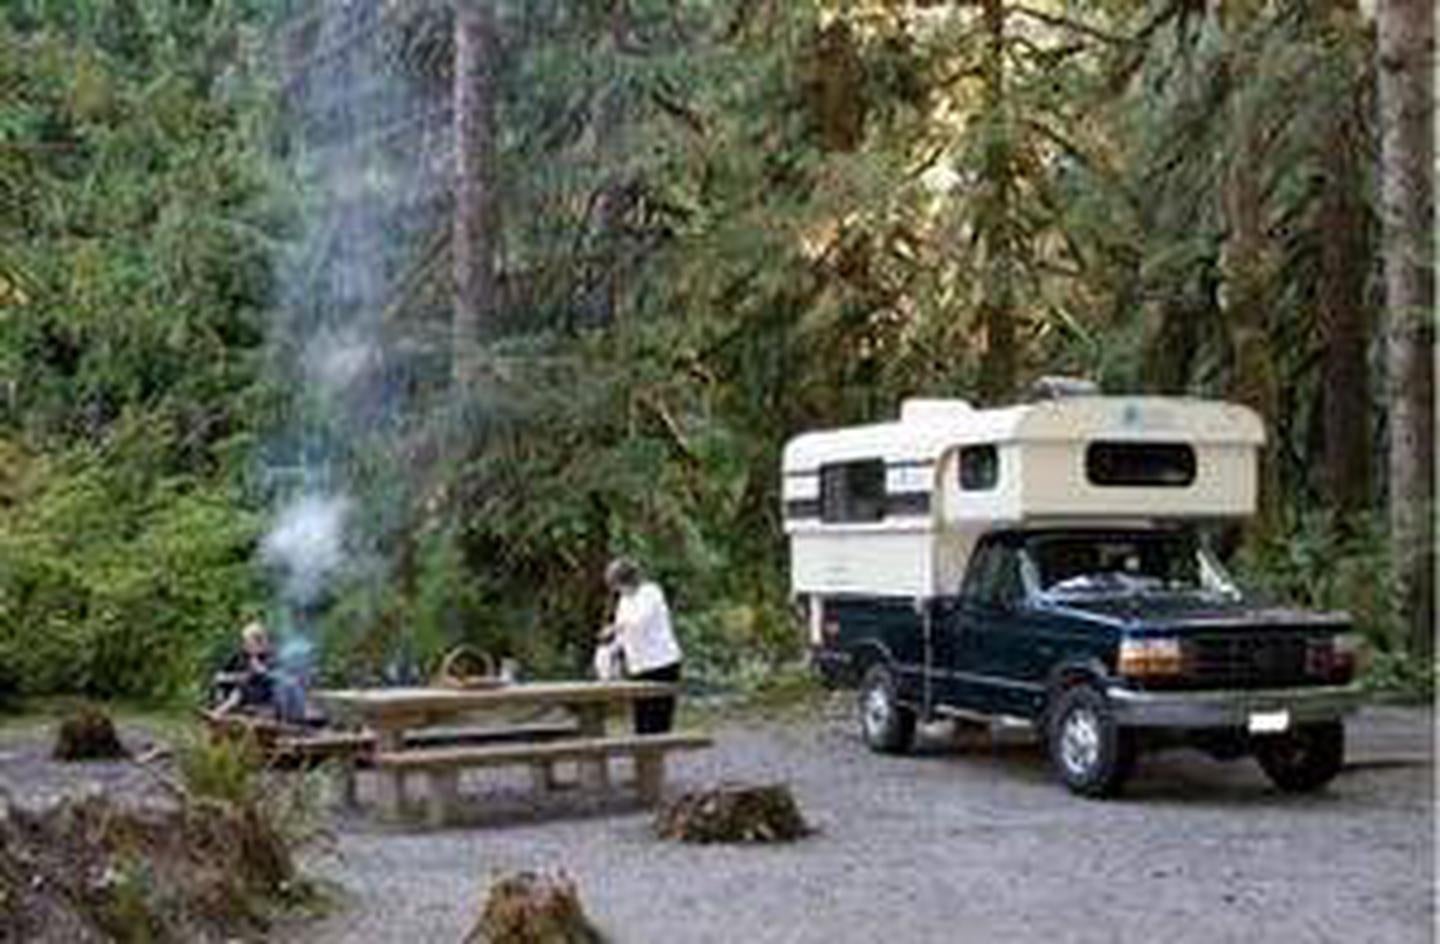 Turlo campsite with picnic table and camper



A camper is parked at a campsite in Turlo Campground

Credit: USFS